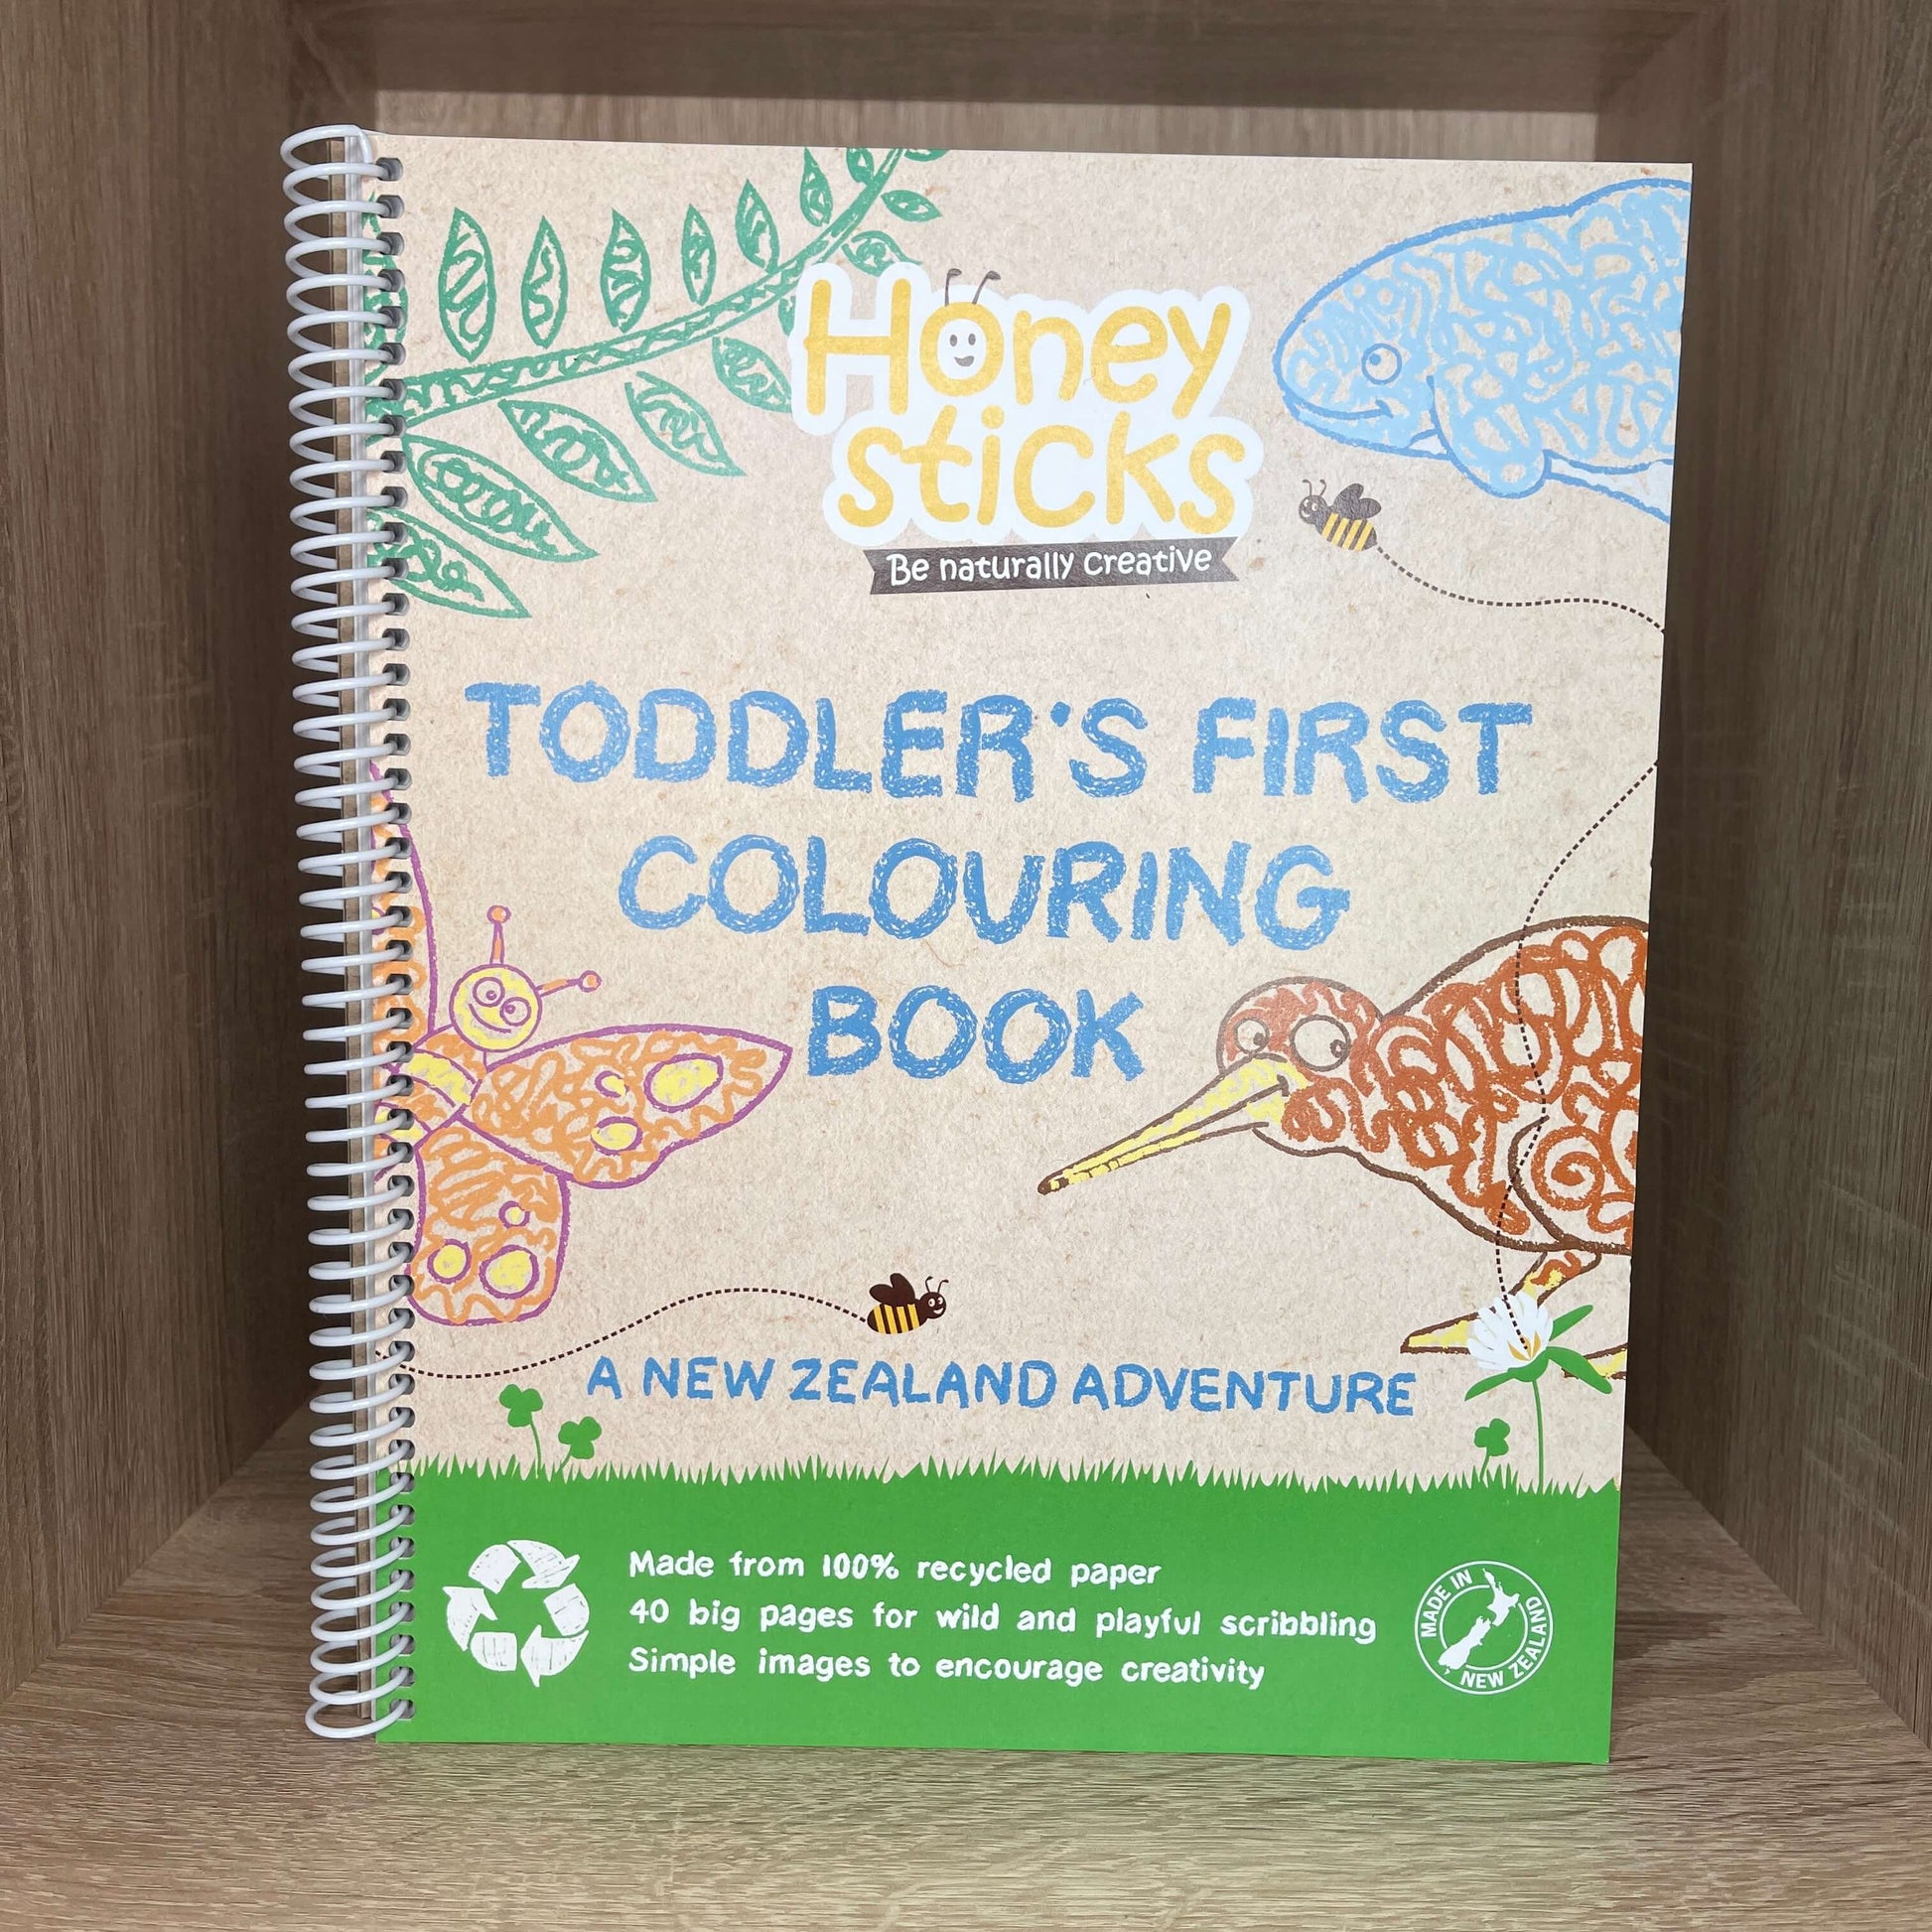 Toddler colouring book in a New Zealand theme.